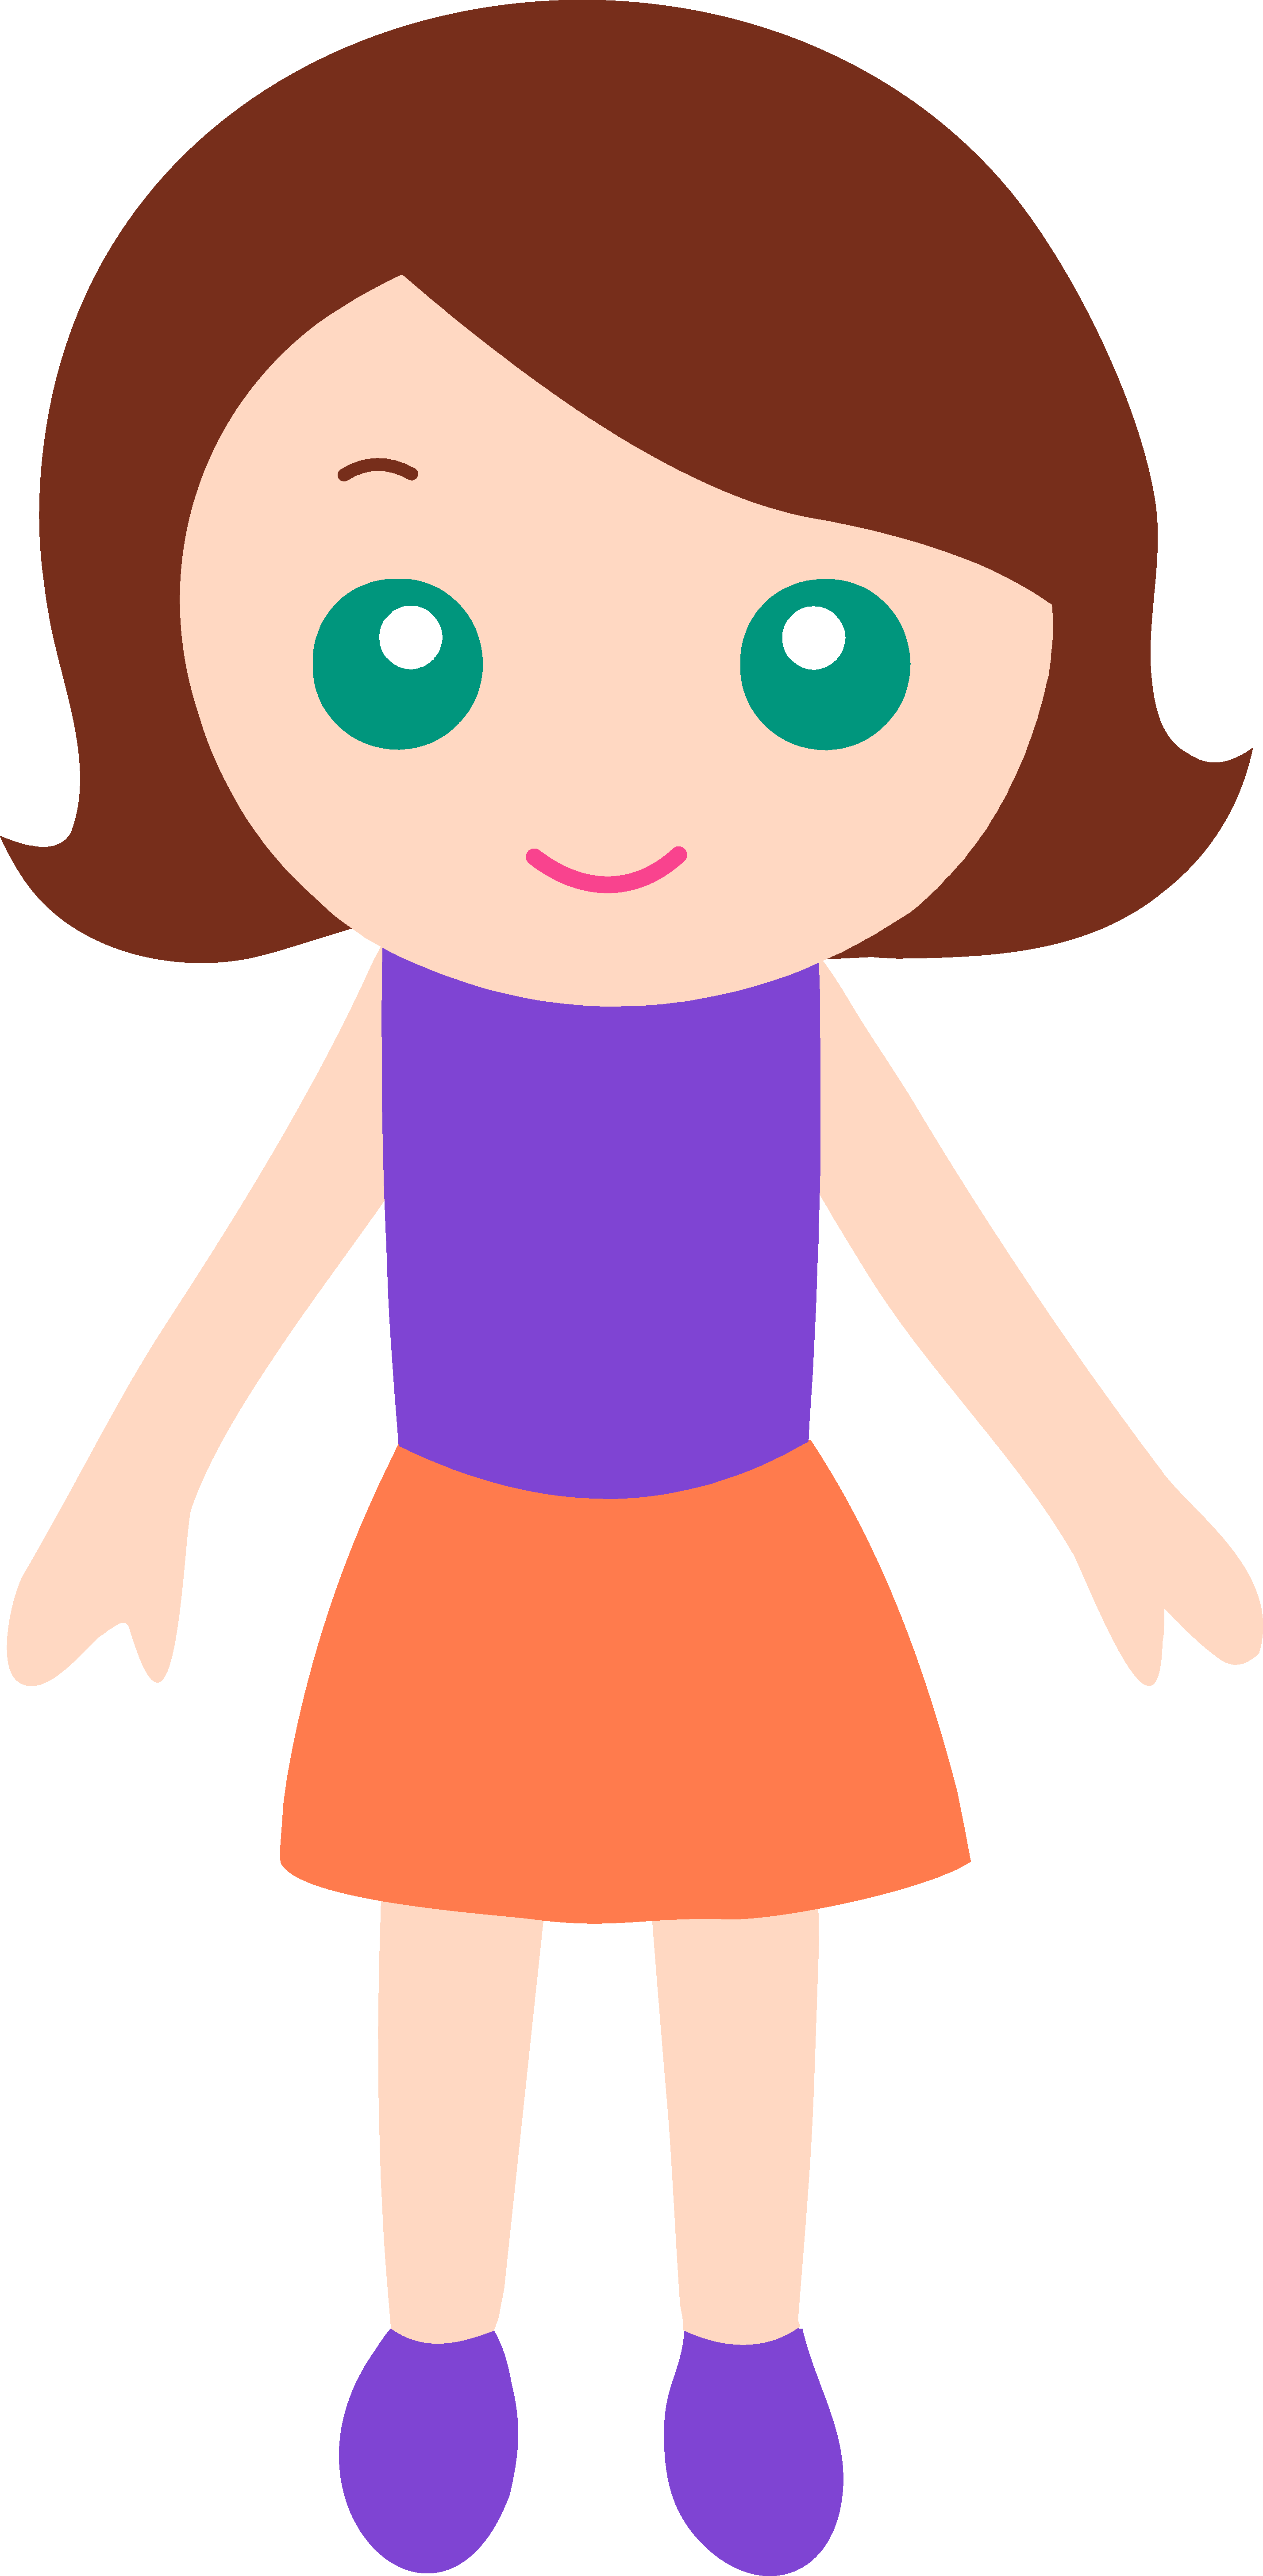 Panda free images brownhairclipart. Excited clipart five girl